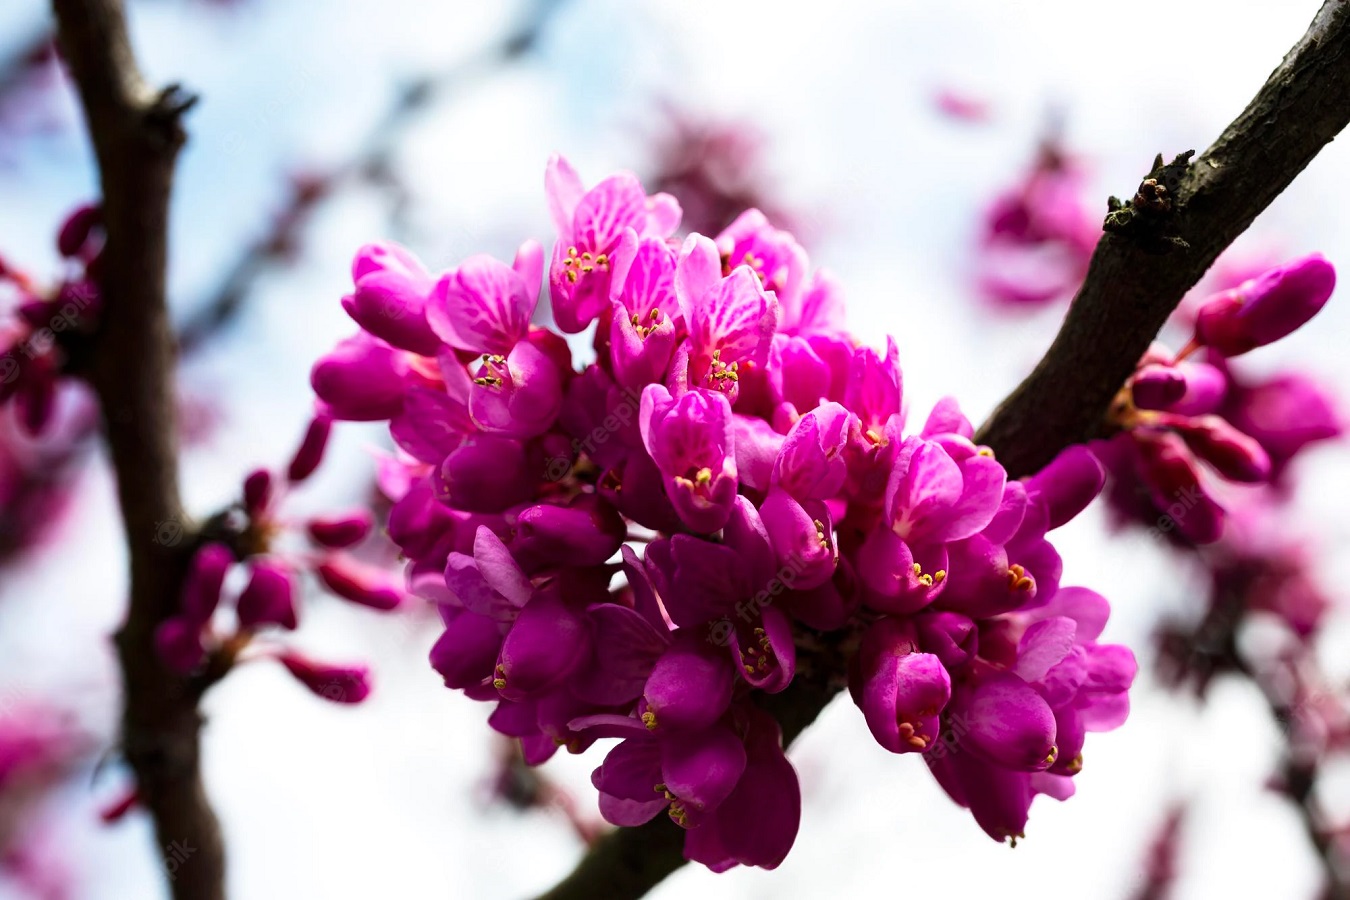 Redbud Tree - Varieties and How to Care for Cercis Trees